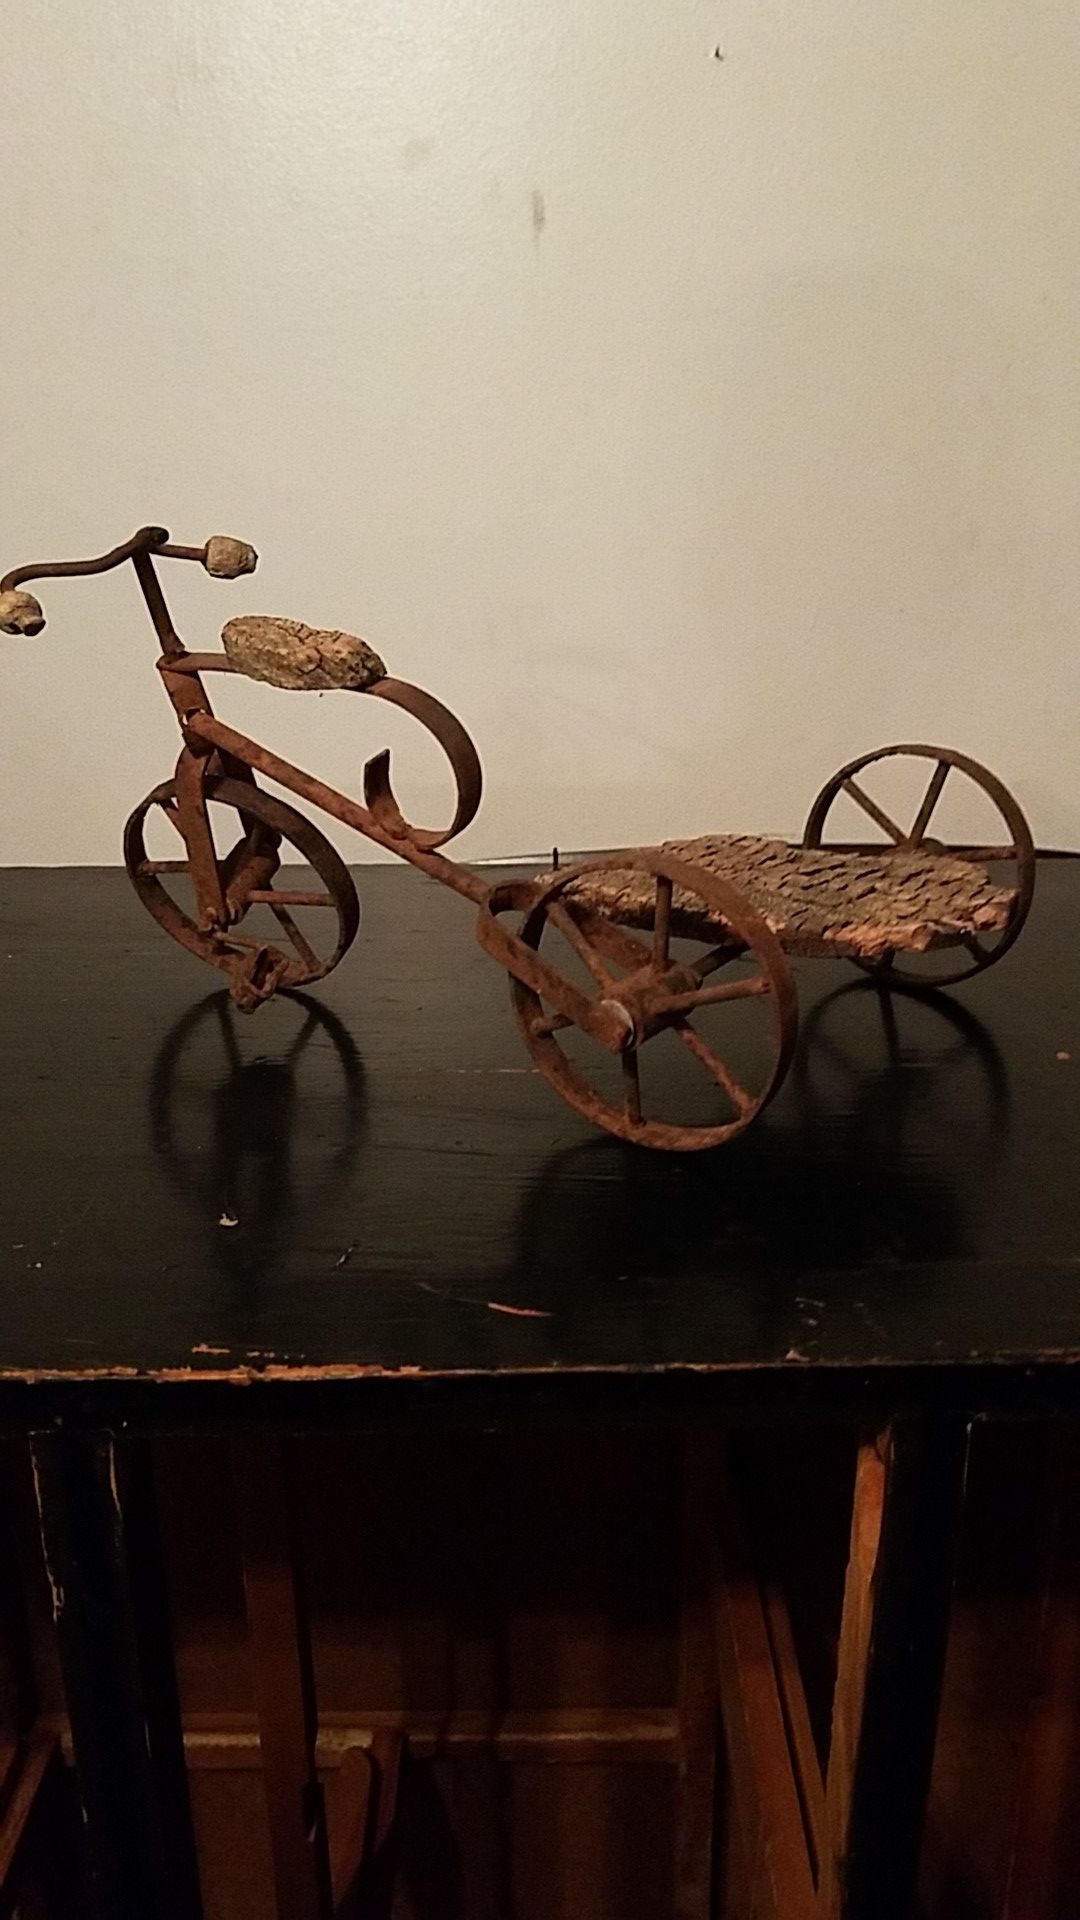 Antique toy very old metal bicycle